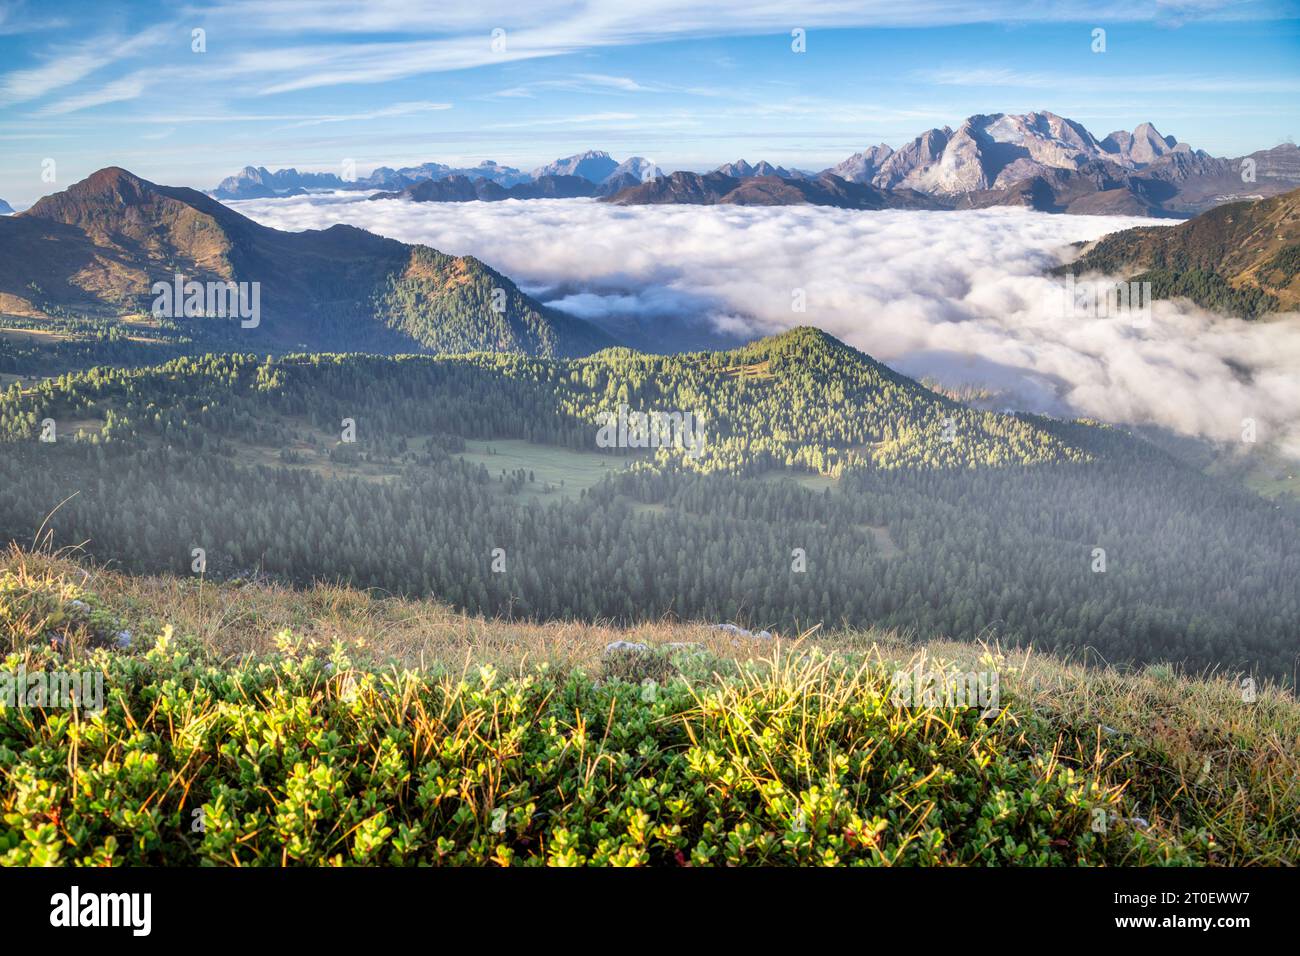 Italy, Veneto, province of Belluno, view from above towards the Padon ridge and Marmolada, below in the valley a carpet of clouds, Dolomites Stock Photo